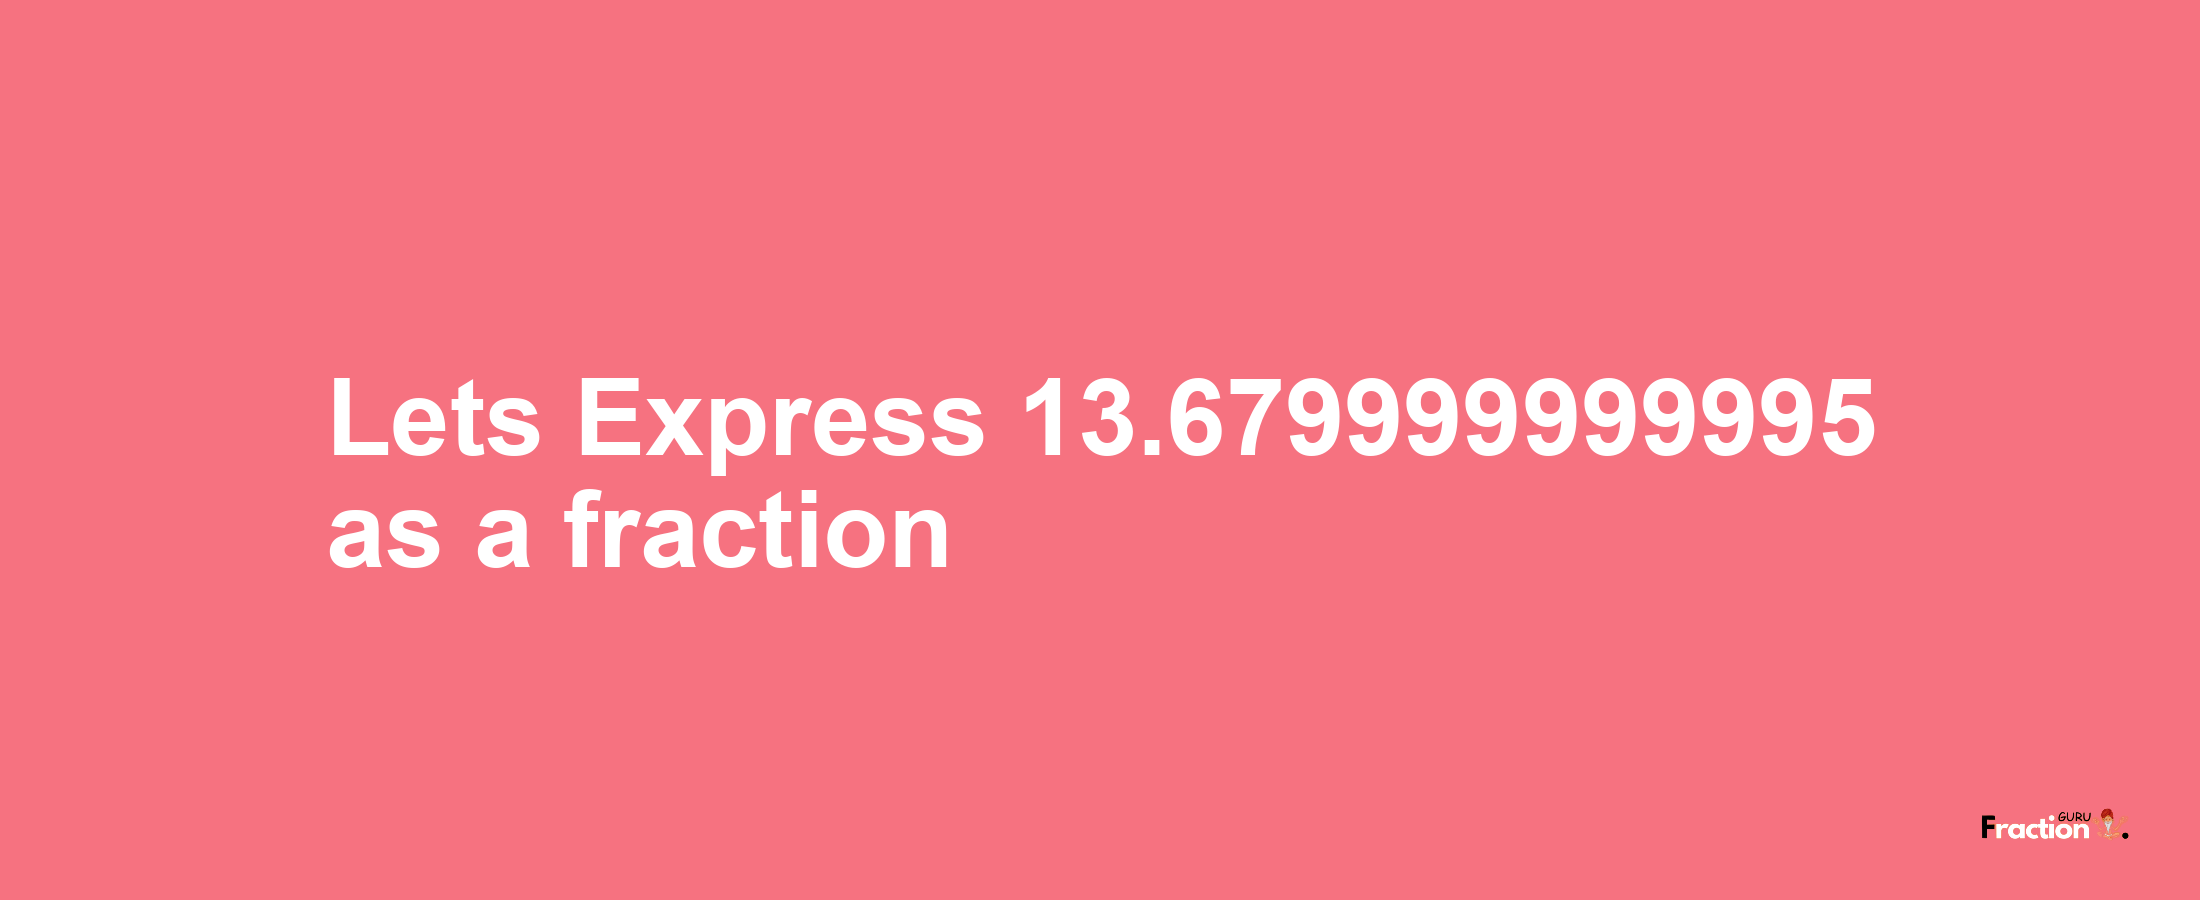 Lets Express 13.679999999995 as afraction